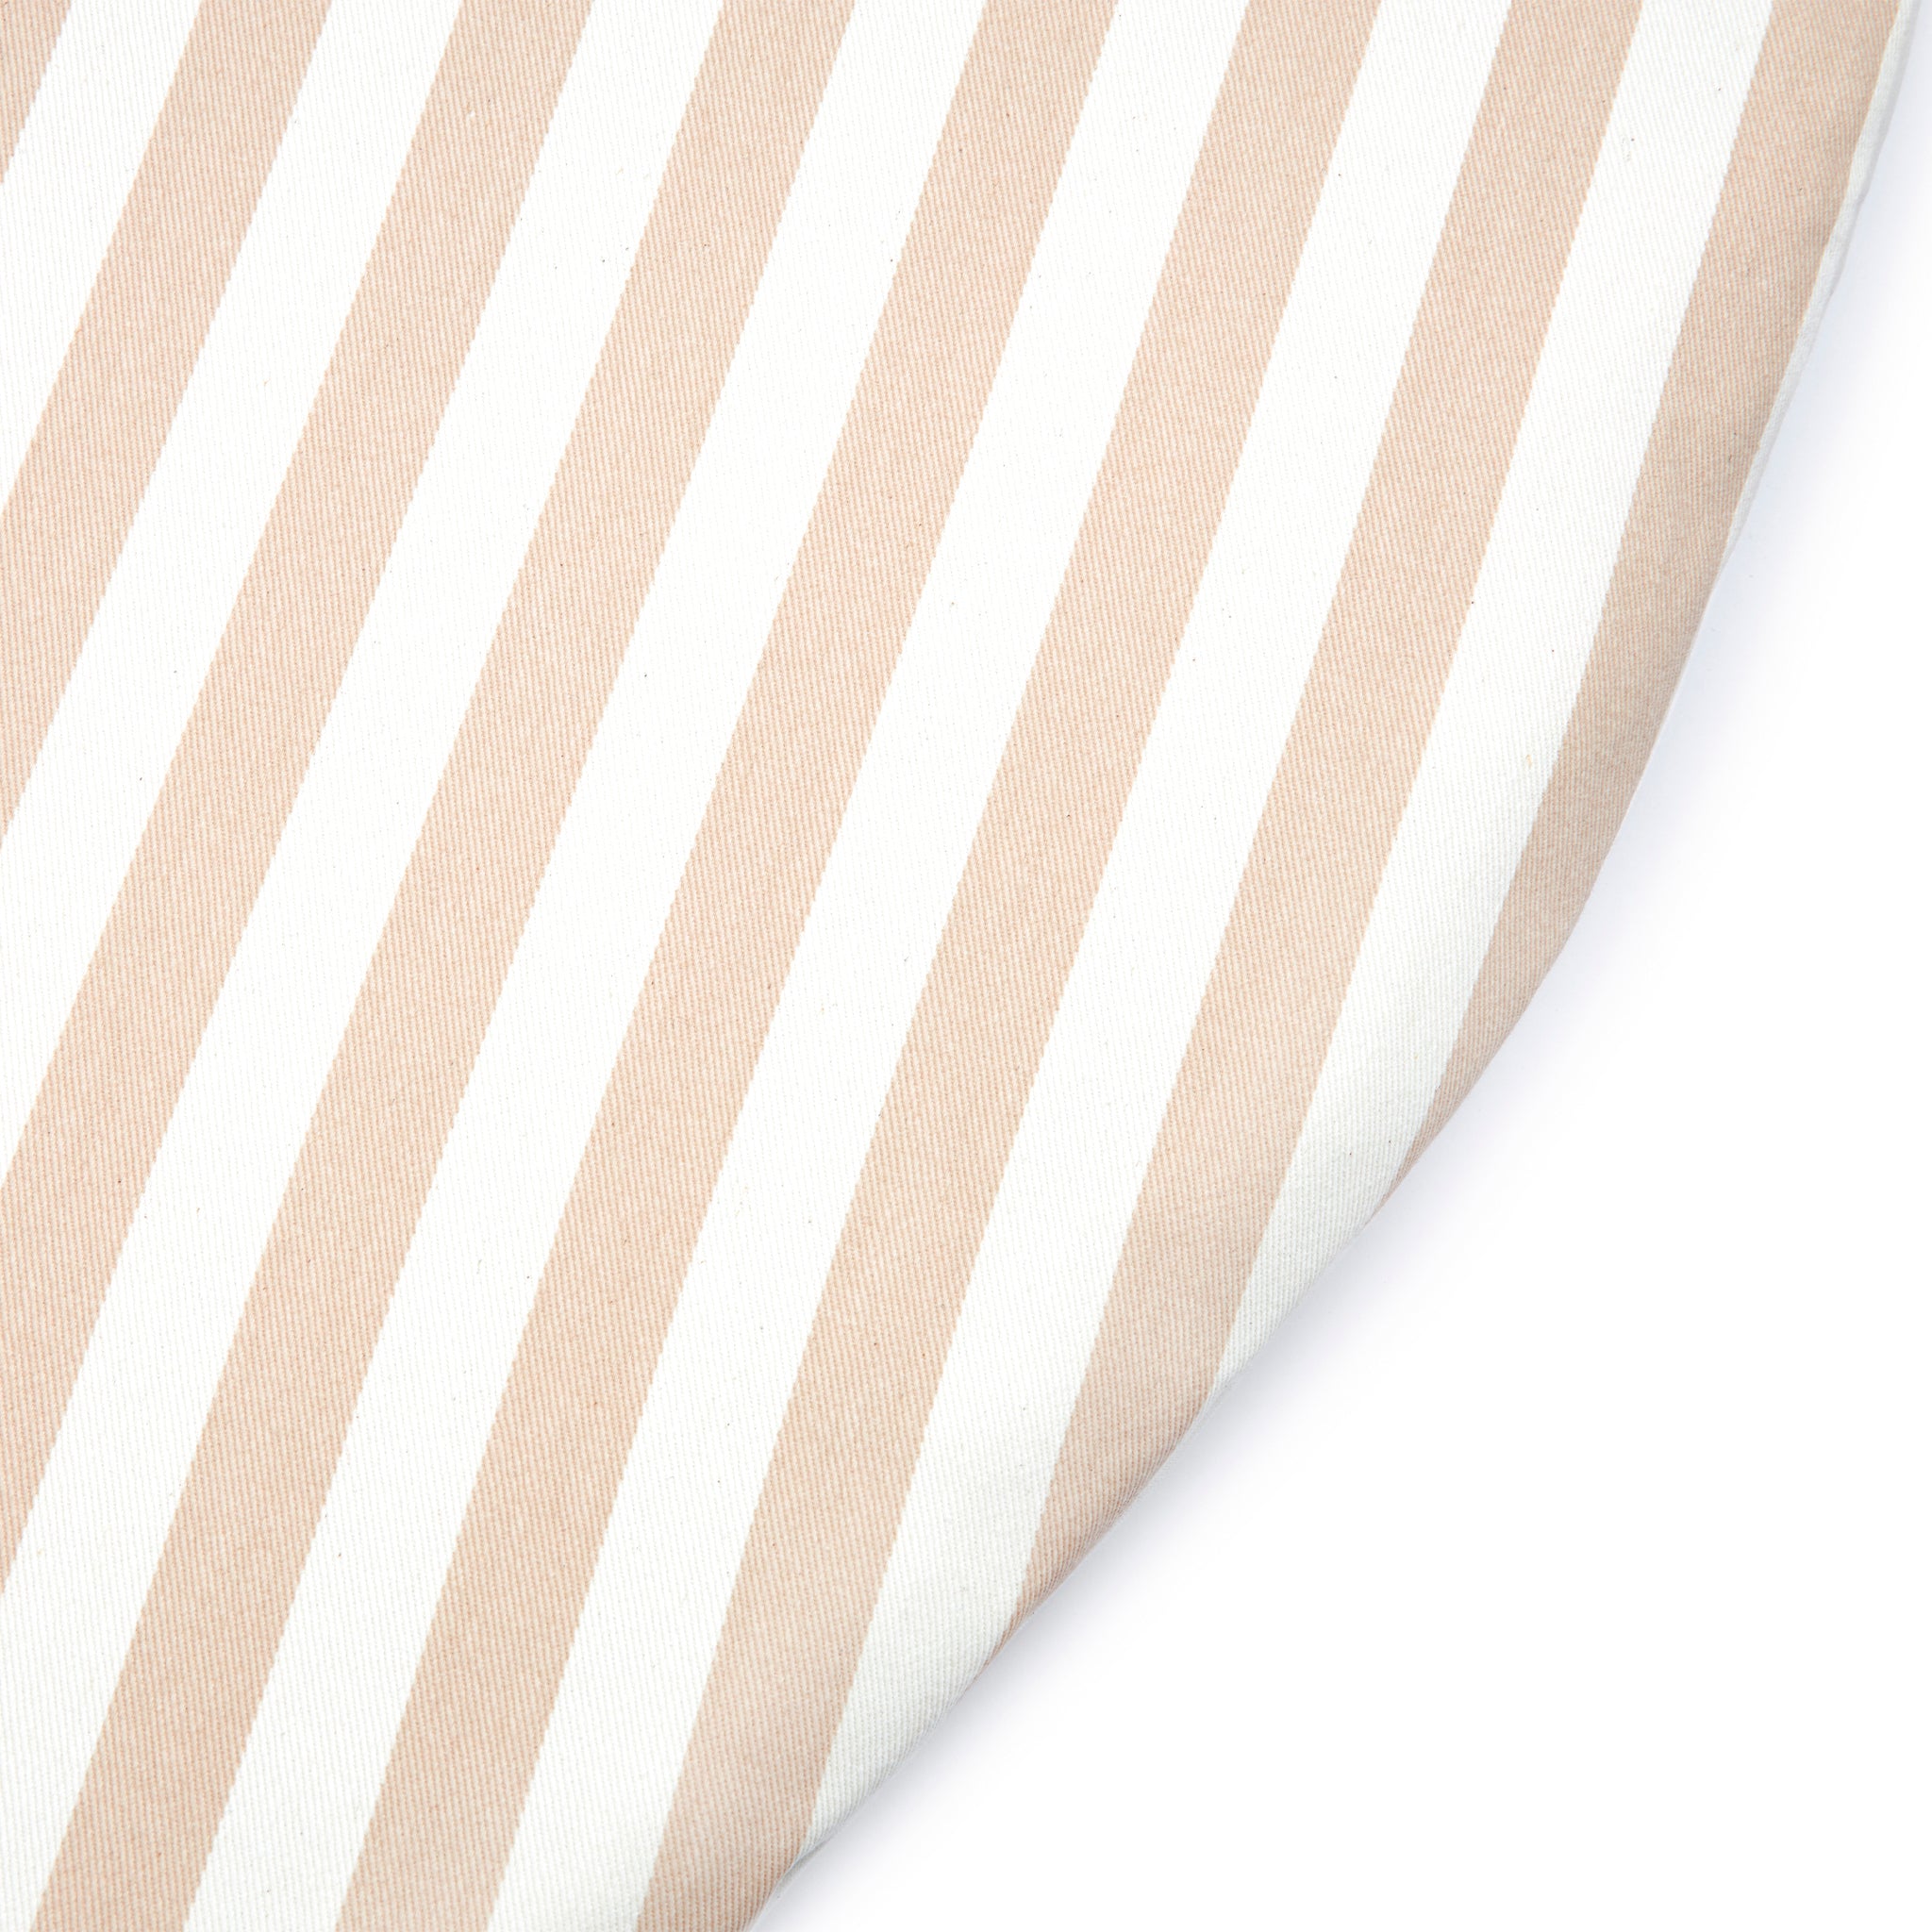 Nobodinoz Fluffy Round Playmat in Taupe Stripes Details 